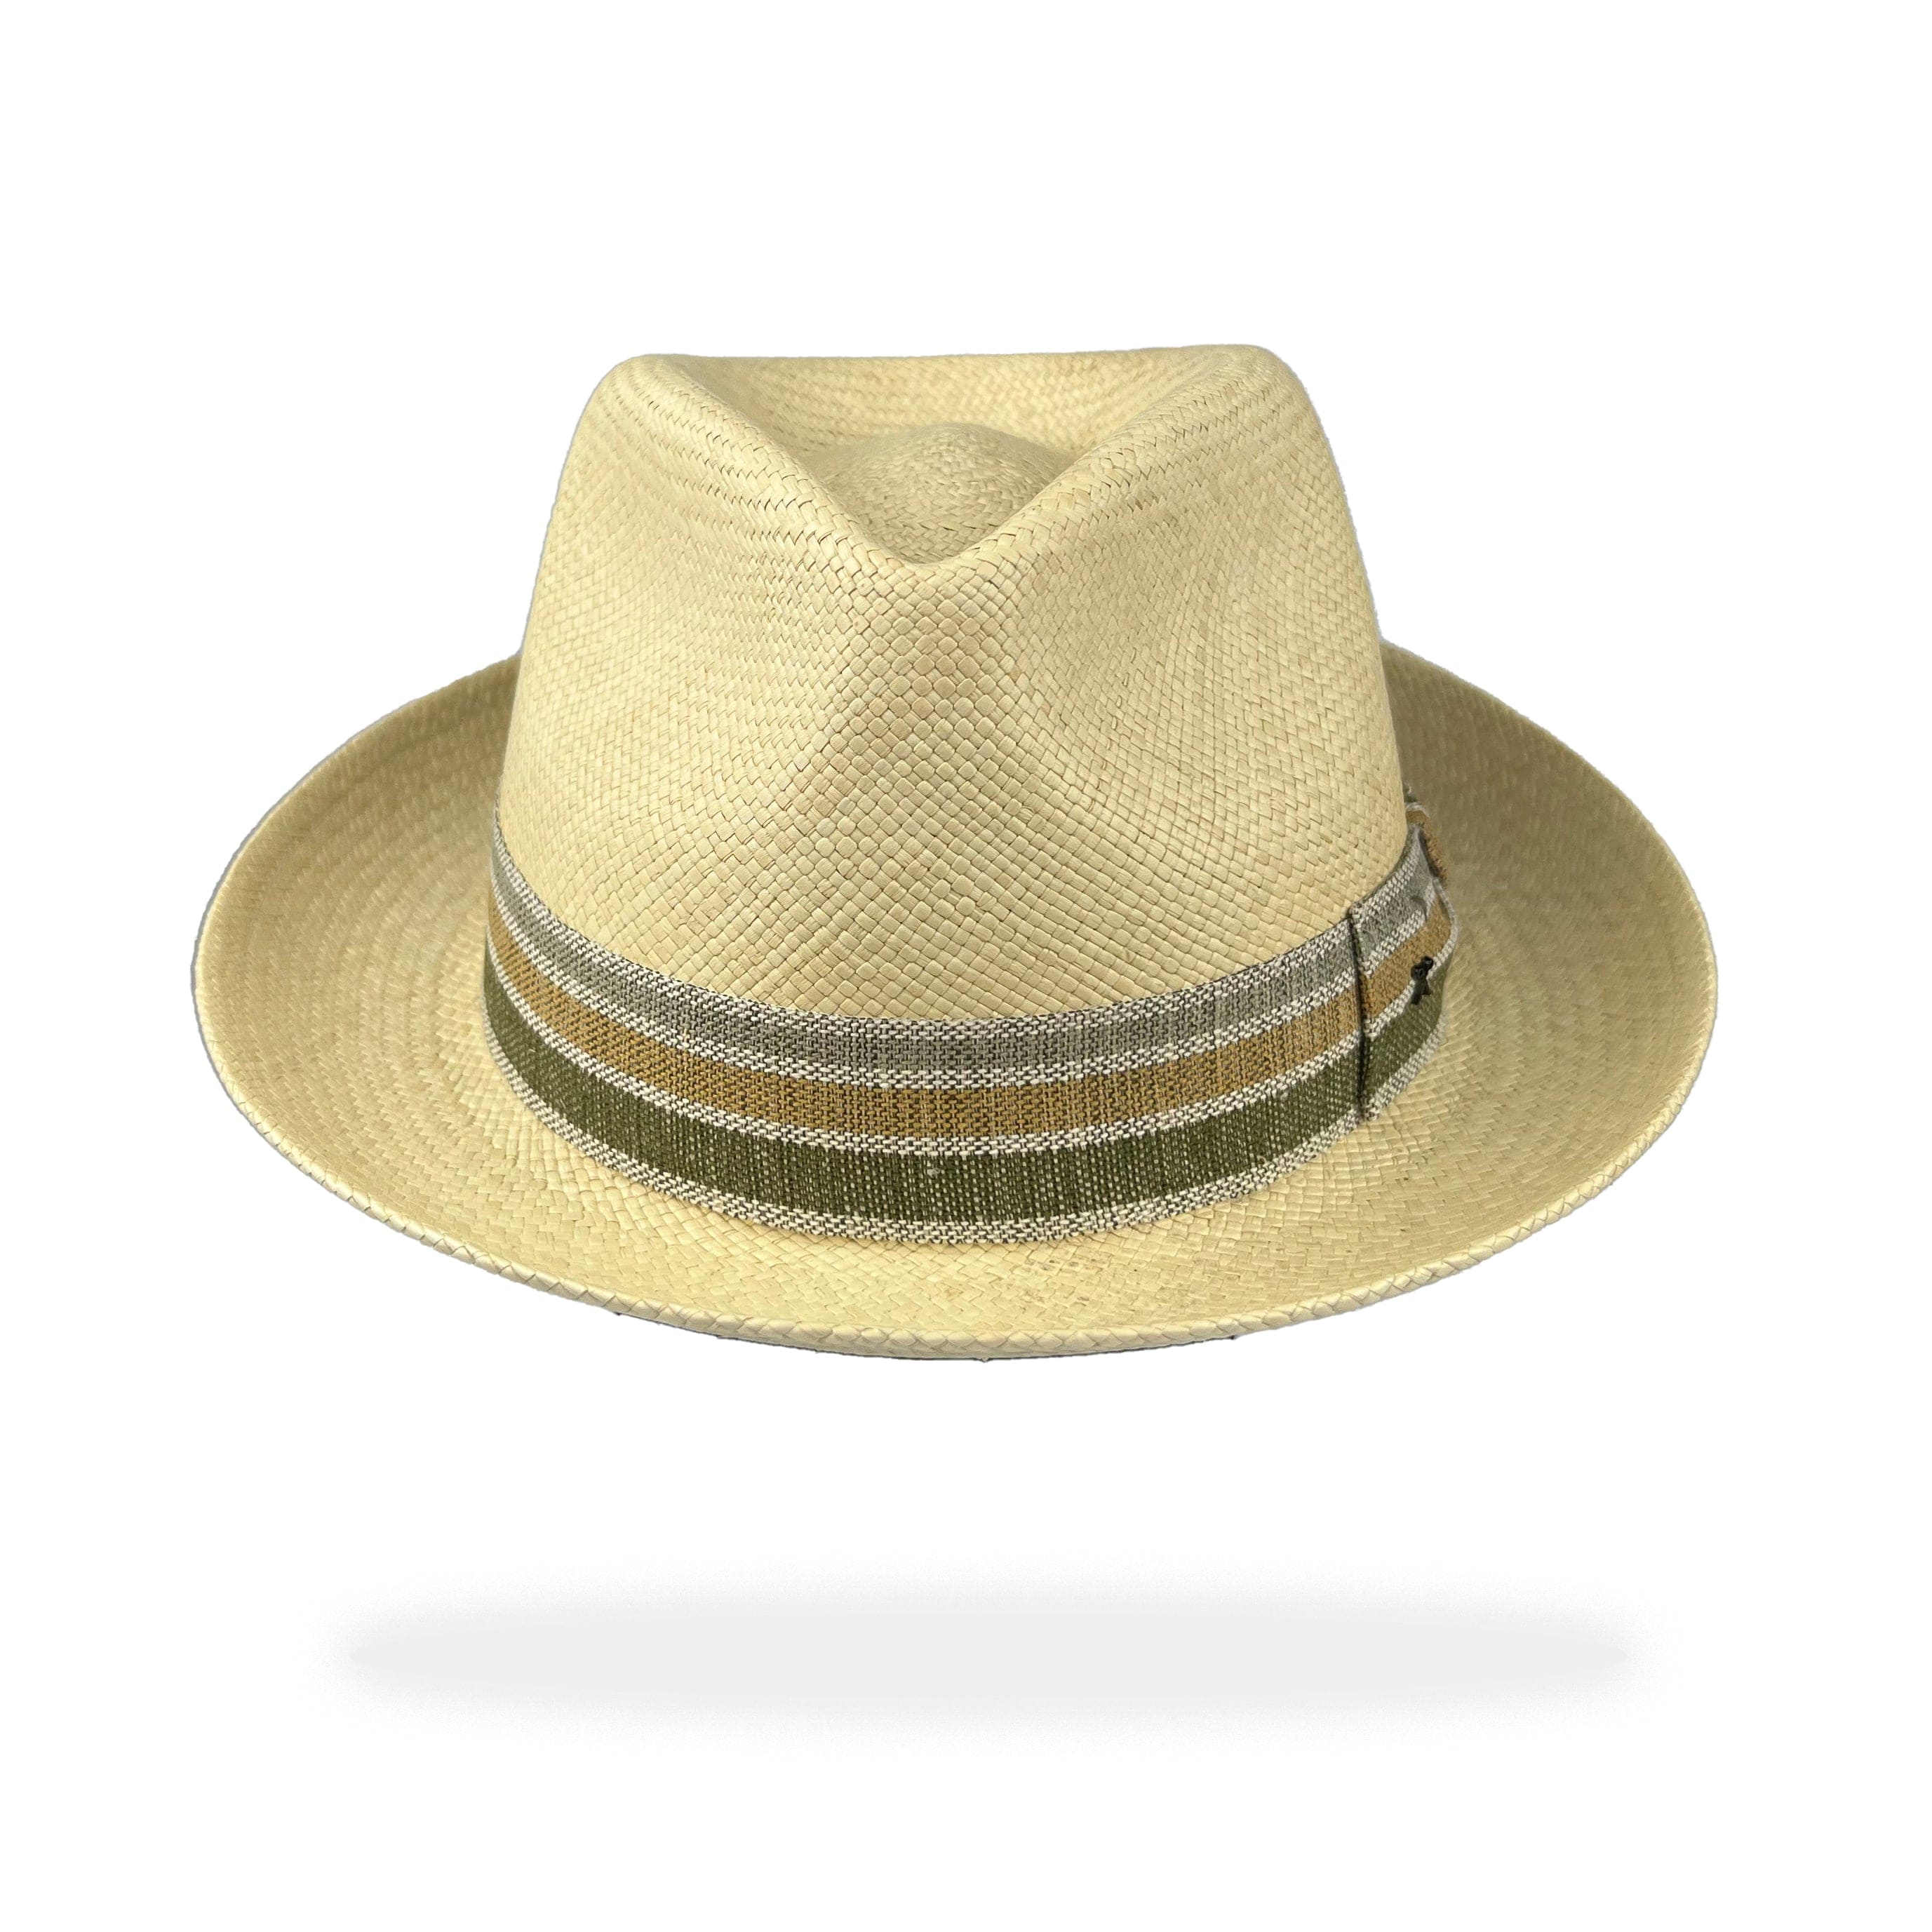 Unisex | Trilby Panama Hat | Olive Multi Band | Made in Italy